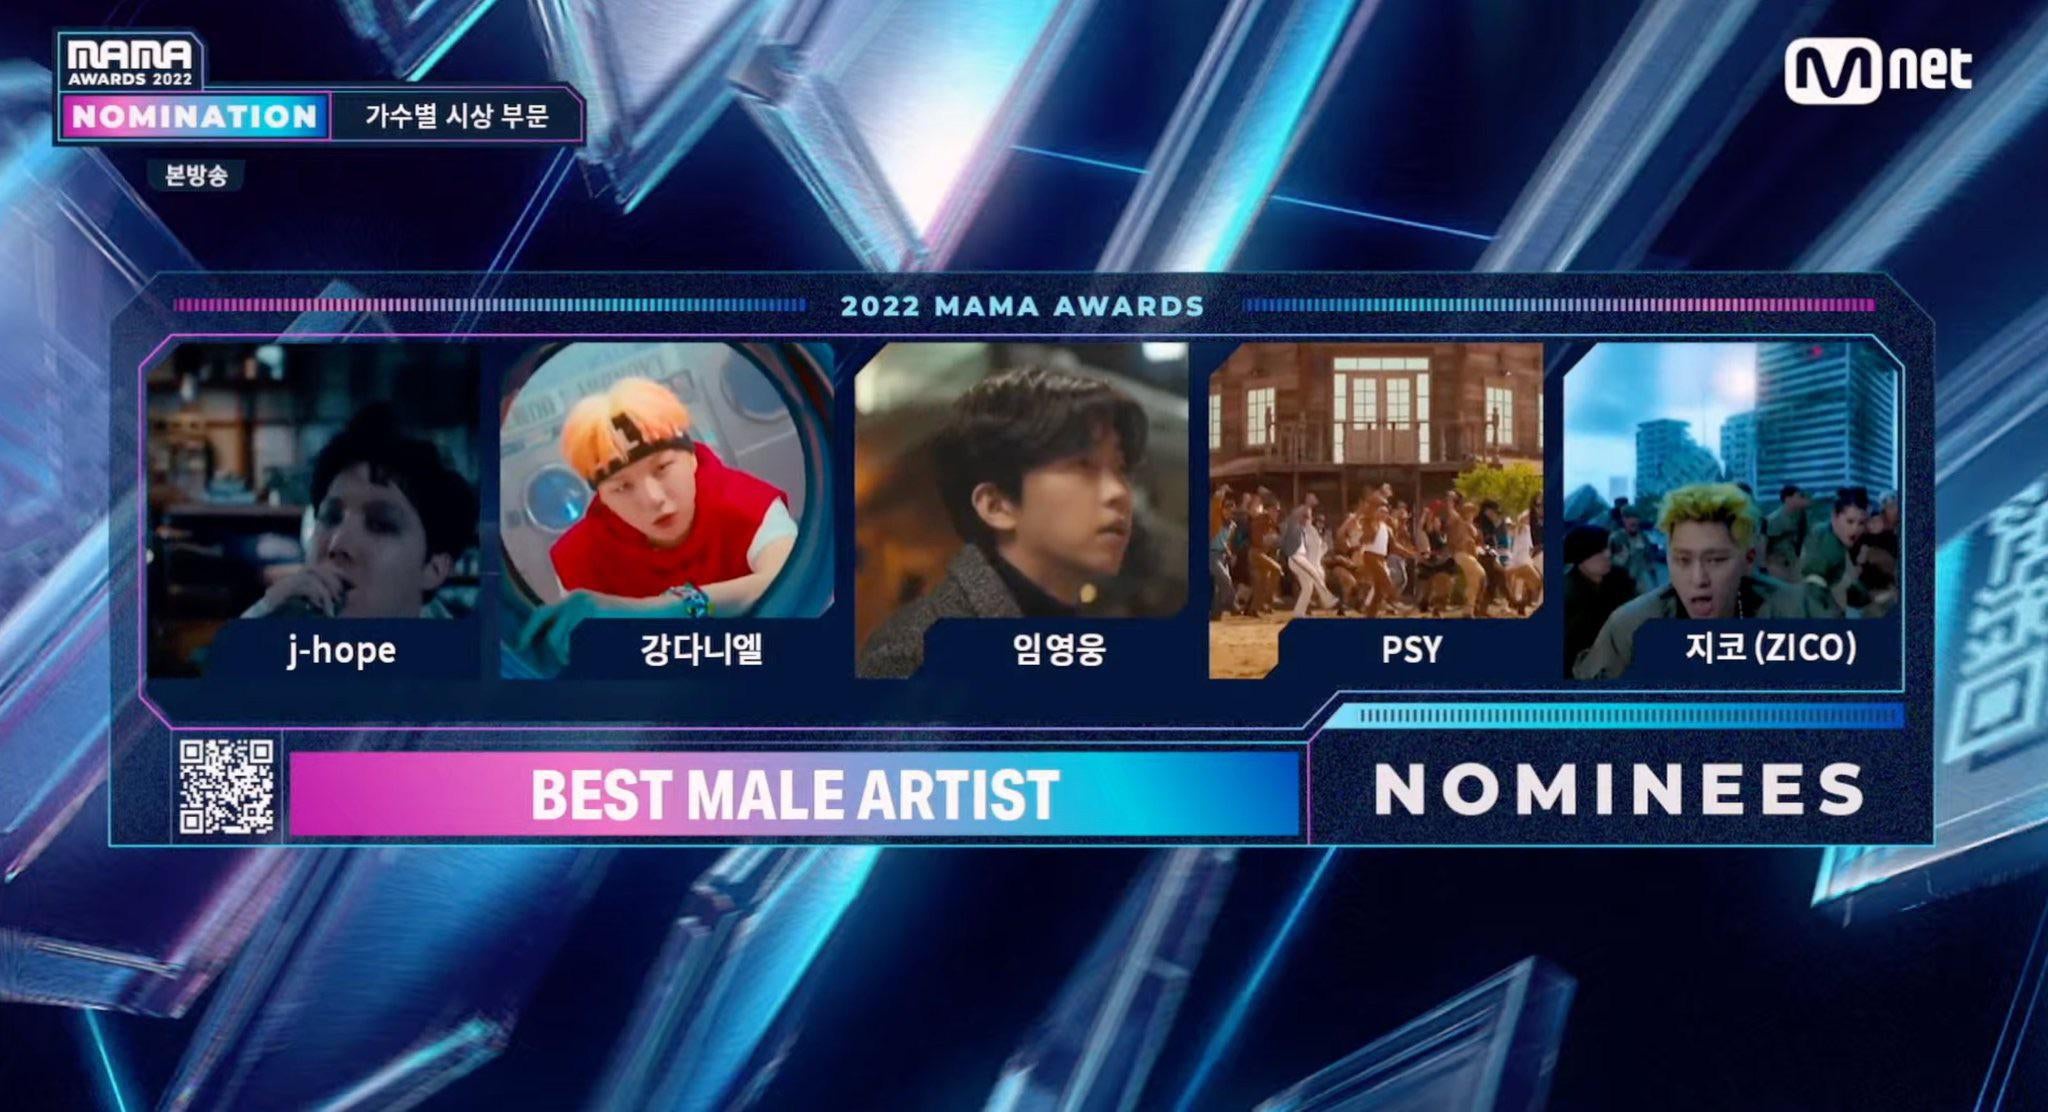 jhope has been nominated for "Best Male Artist" at 2022 MAMA